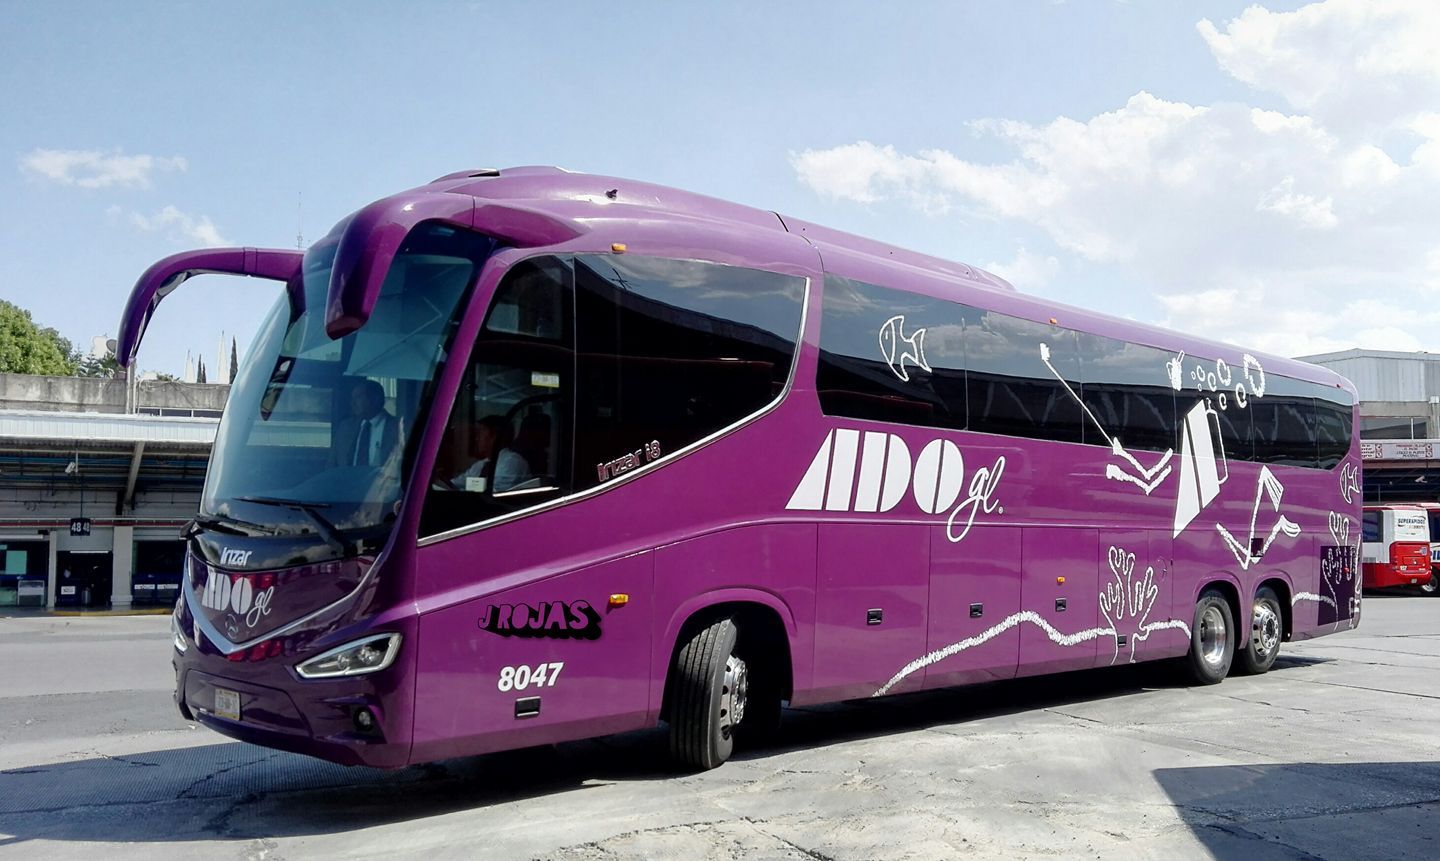 ADO GL - Bus Tickets | Check Schedule and Book Online